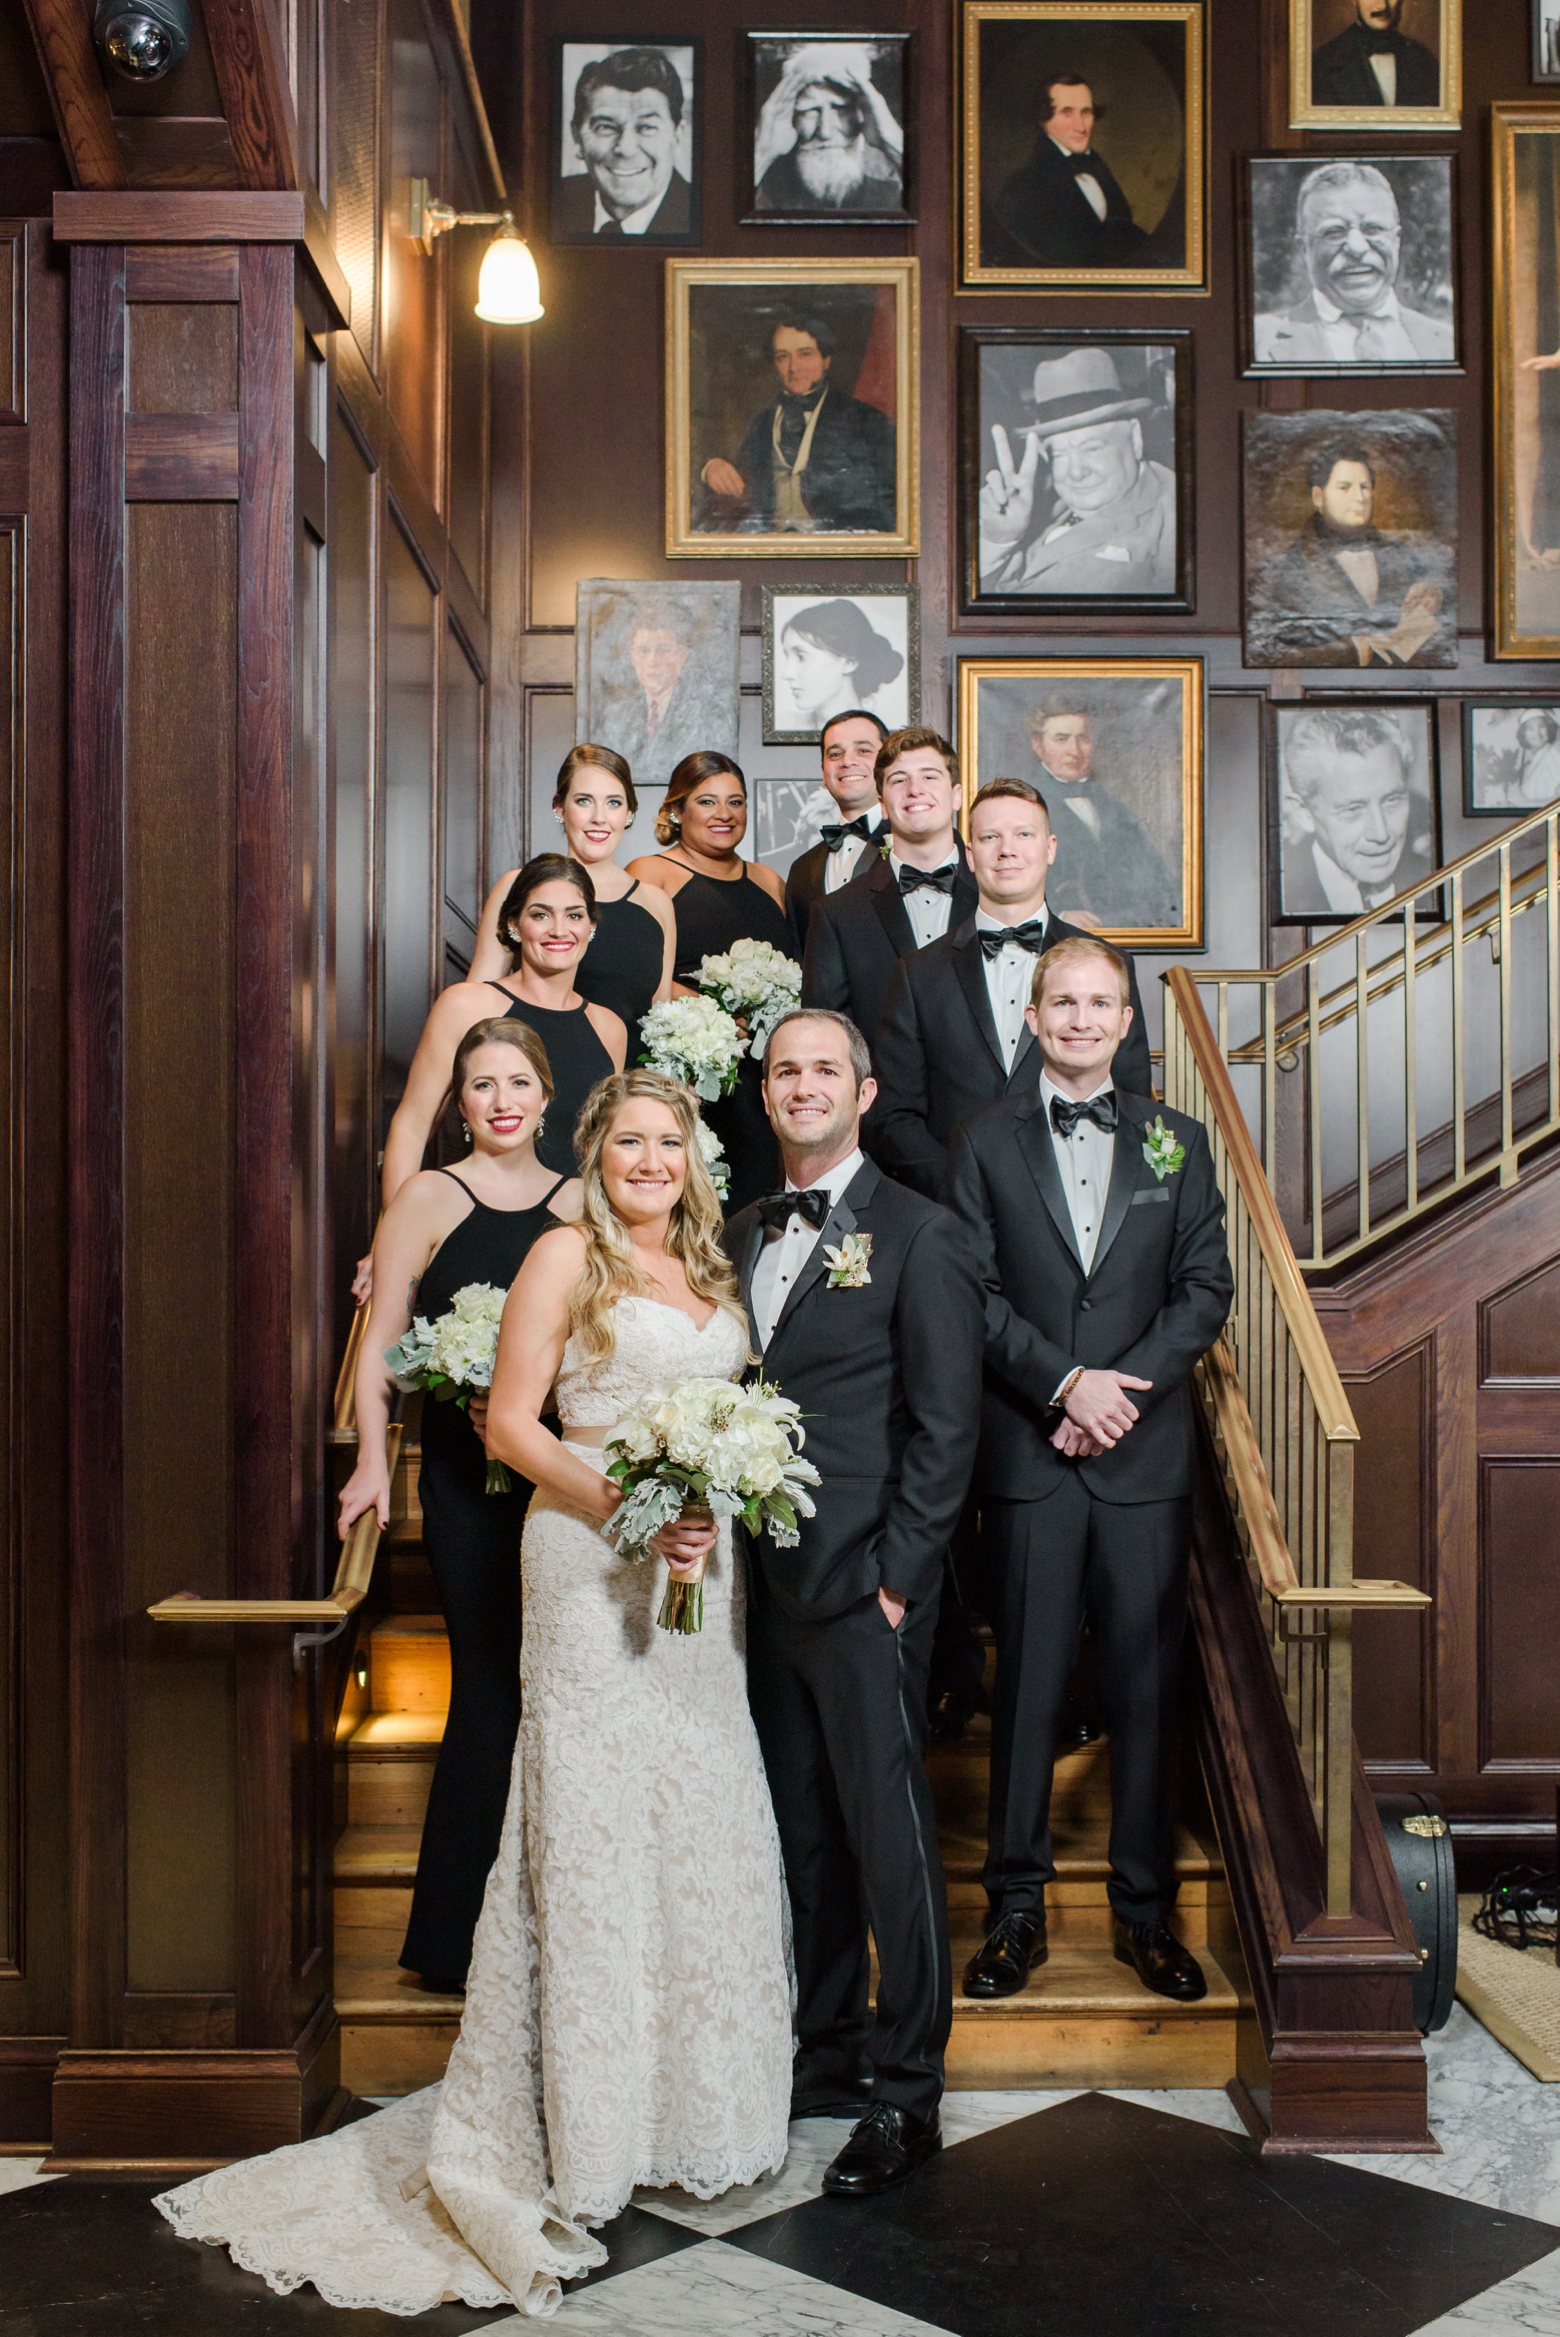 The Wedding Party pose for a formal photo on the steps inside the Oxford Exchange in Tampa, FL